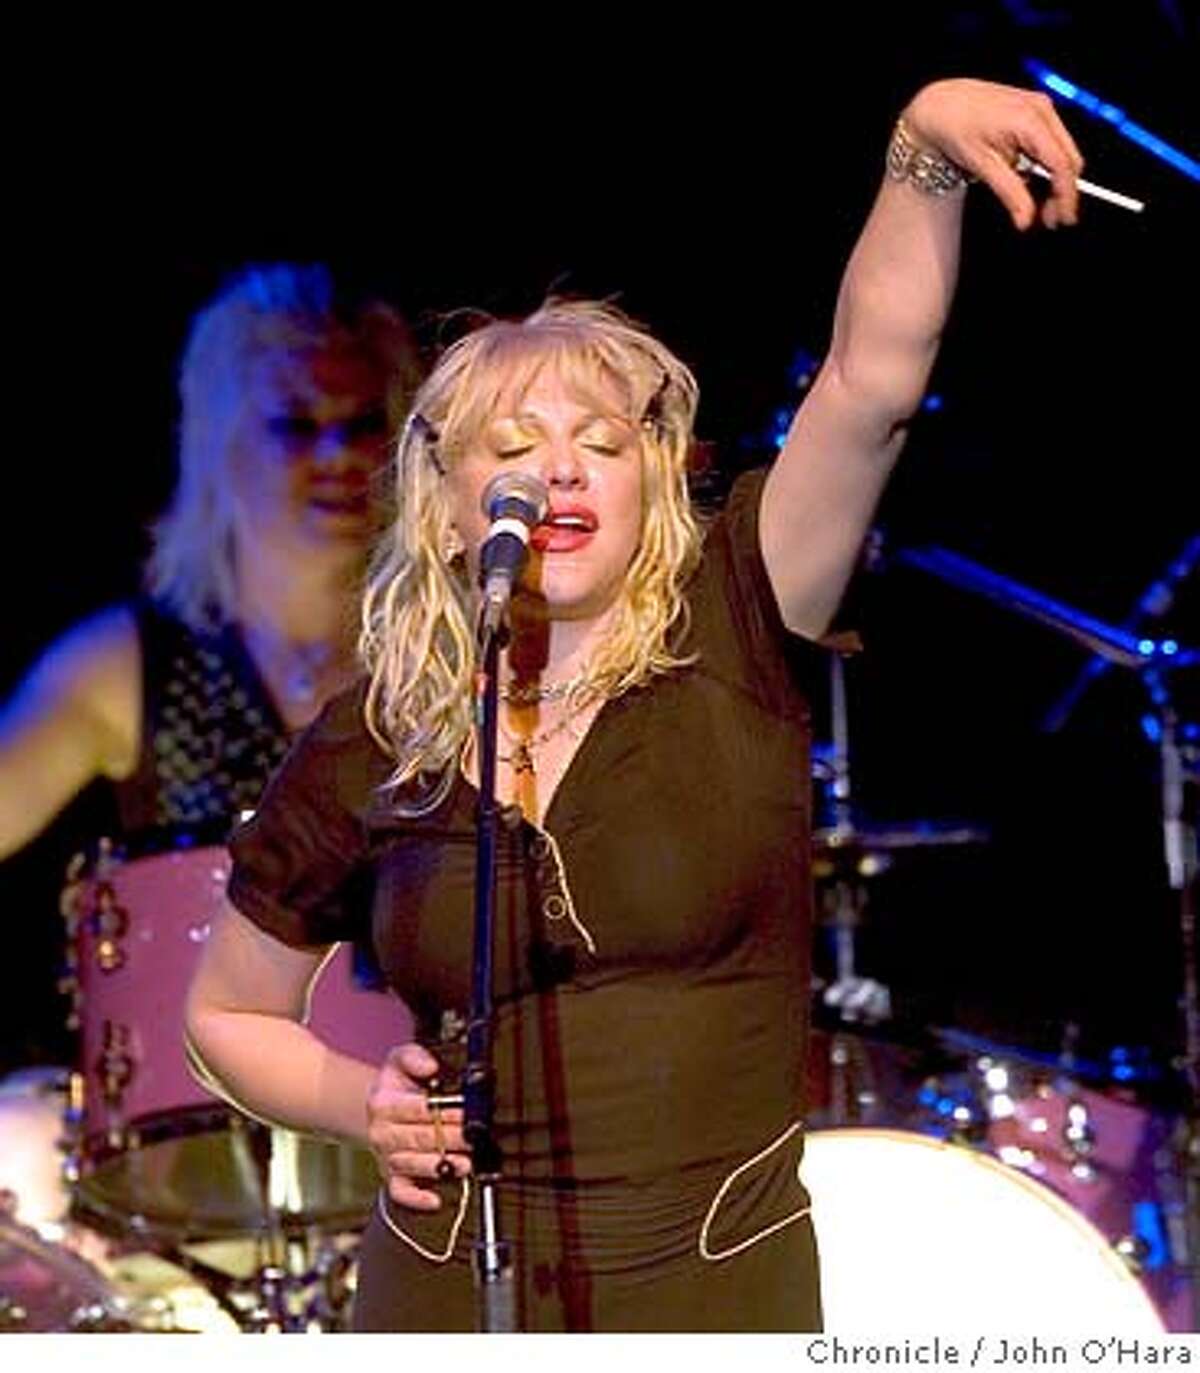 Fillmore Auditorium, 1805 Geary Blvd. San Francisco,CA. Courtney Love, in performance